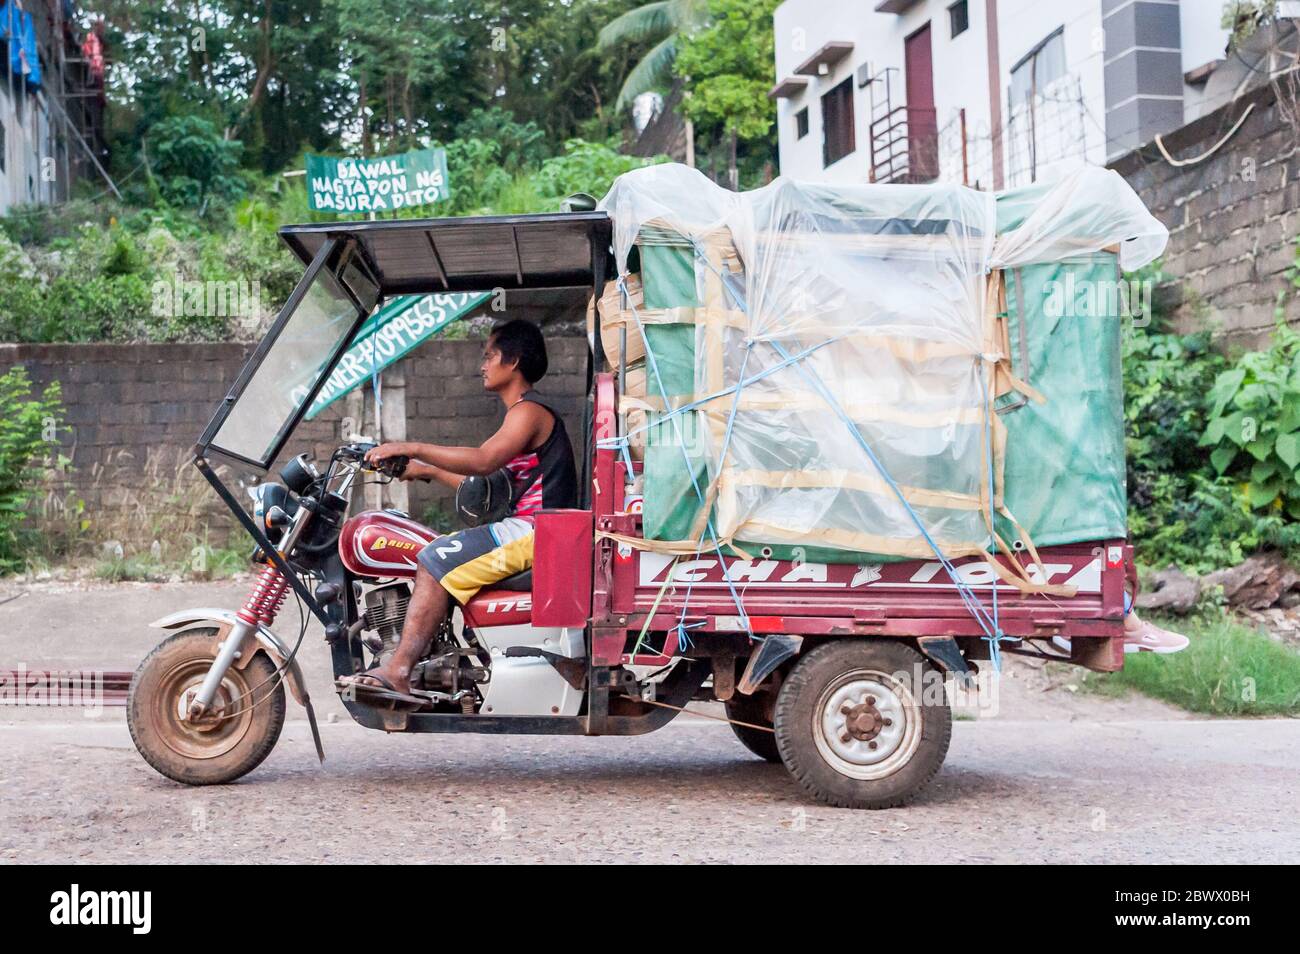 Motorbikes, trikes, lorries, cars and all manner of transport rushes through the dusty main road on Coron Island, Philippines at rush hour. Stock Photo